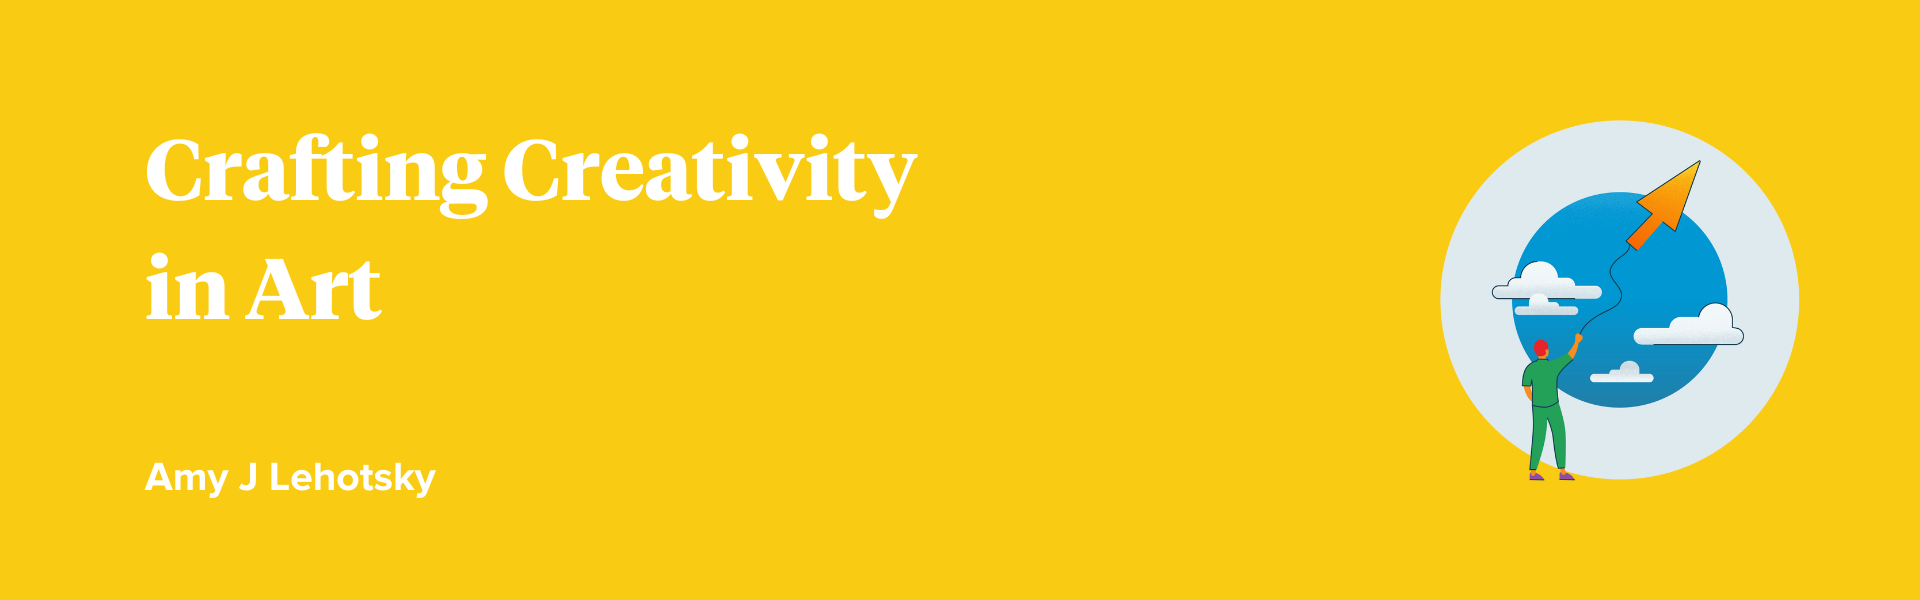 yellow background with white text that reads "crafting creativity in art" by amy lehotsky and an icon of a student flying a kite